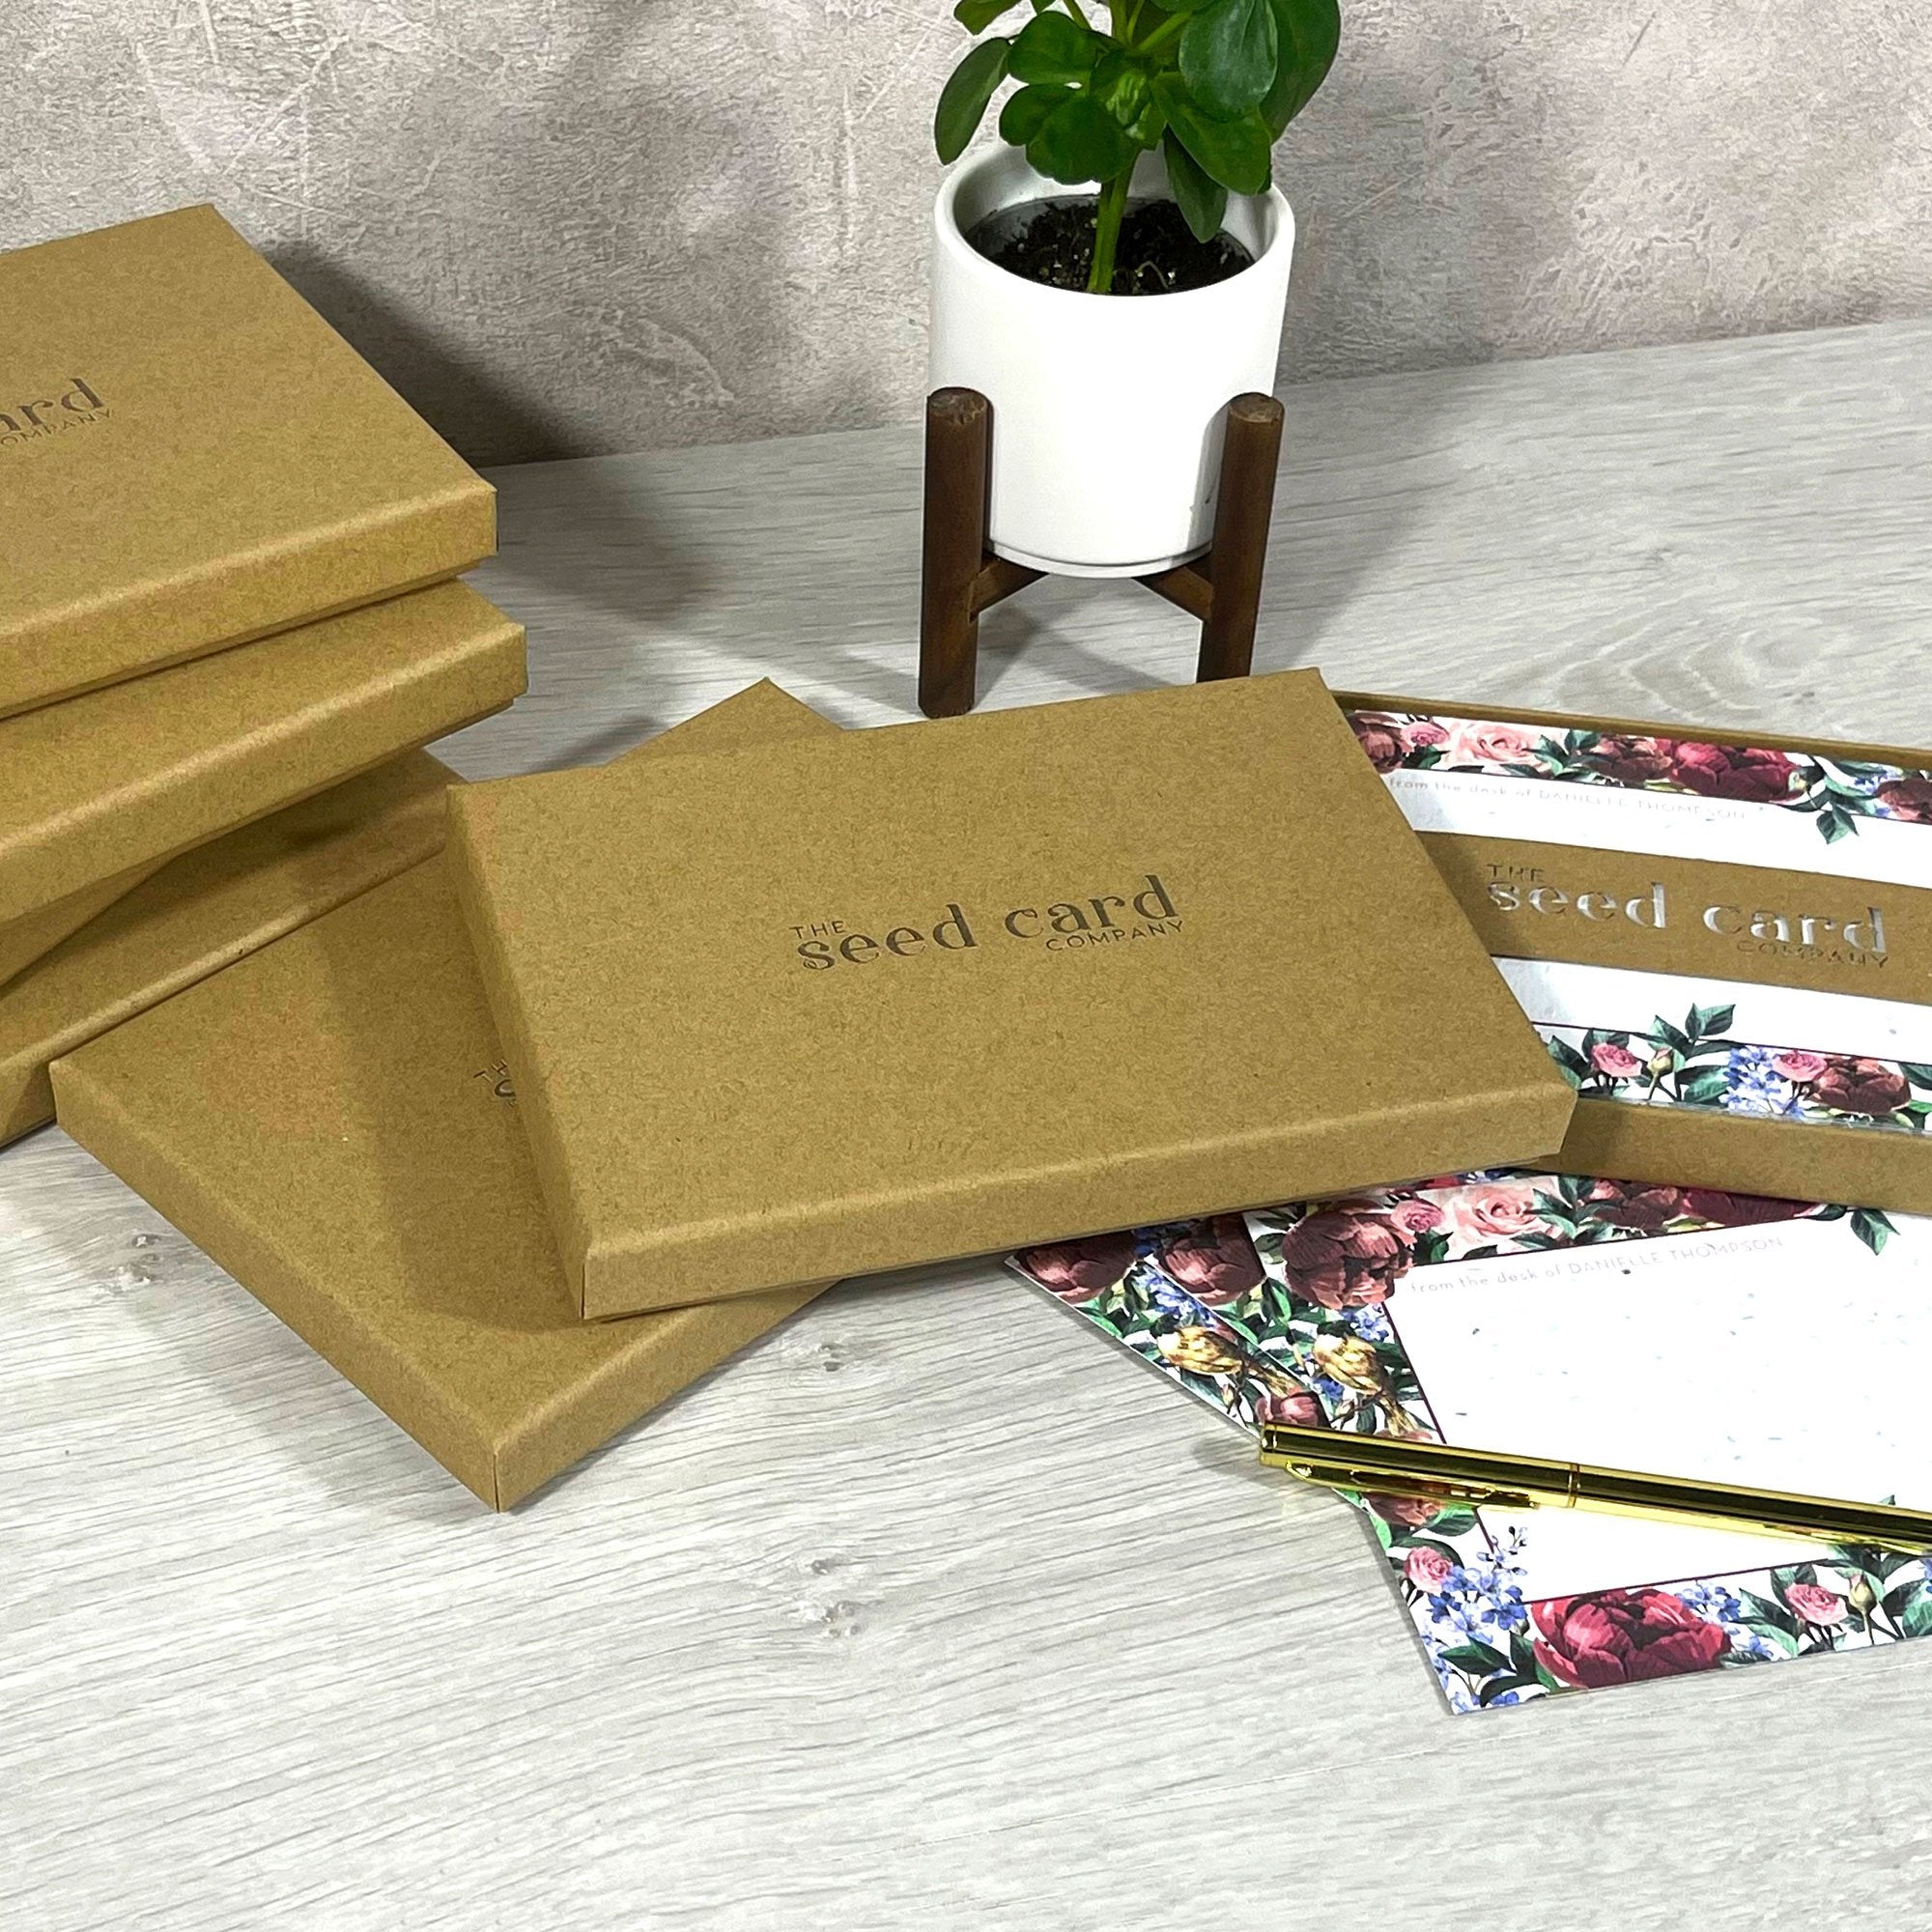 Shop online Blue Meadow - 100% biodegradable seed-embedded cards Shop -The Seed Card Company